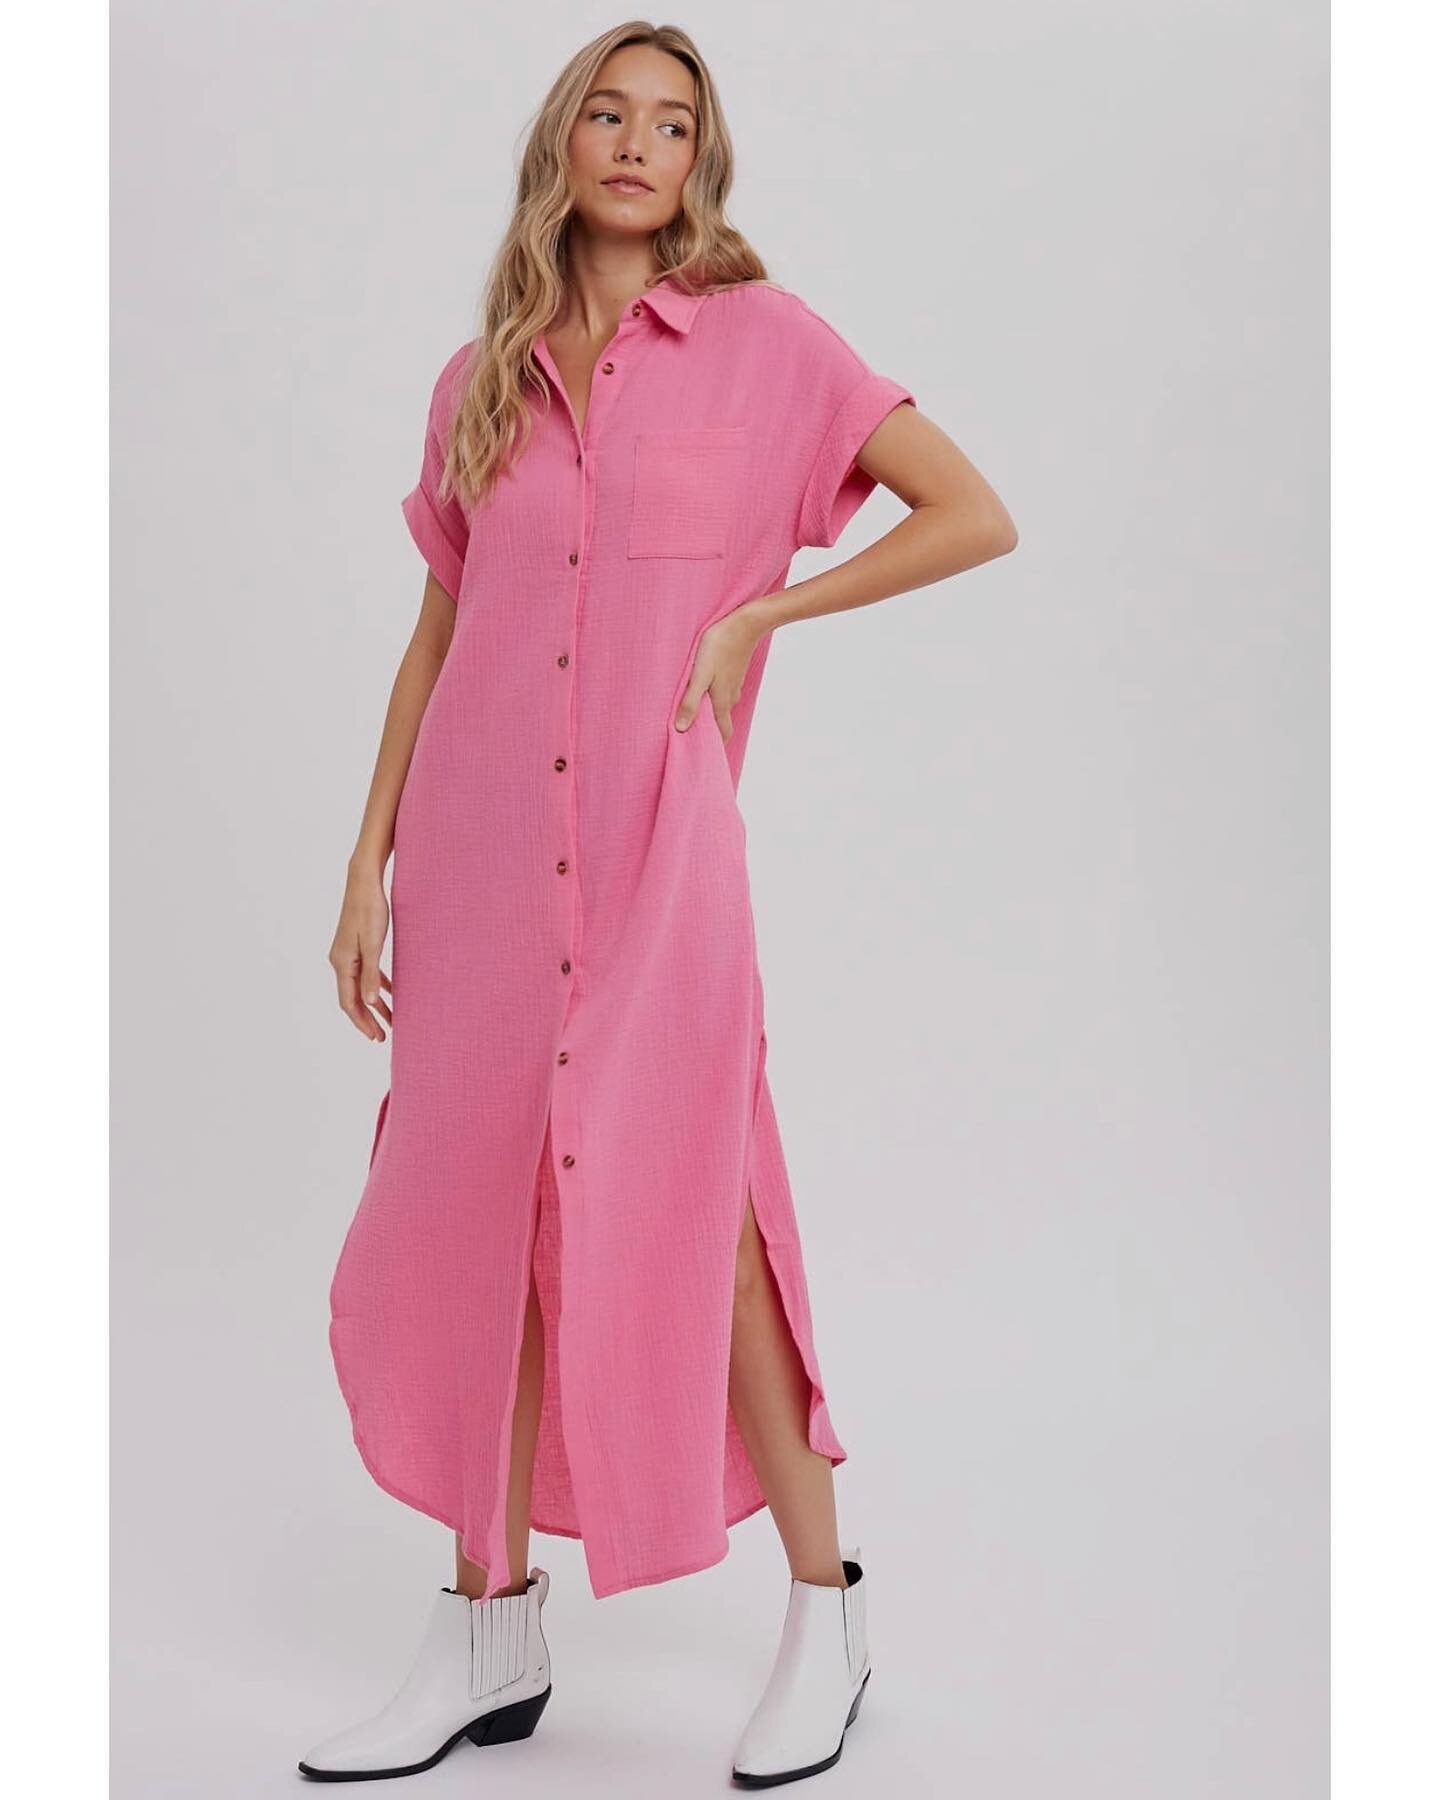 One of our favorite dresses is live and in Barbie pink 🌸💕
:
Dress or swimsuit cover? We can&rsquo;t decide!
:
#open #fashion #comfy #treatyourself #treats #boots #selfcare #selflove #boutique #naturalbeauty #womenownedbusiness #girlpower #workingmo